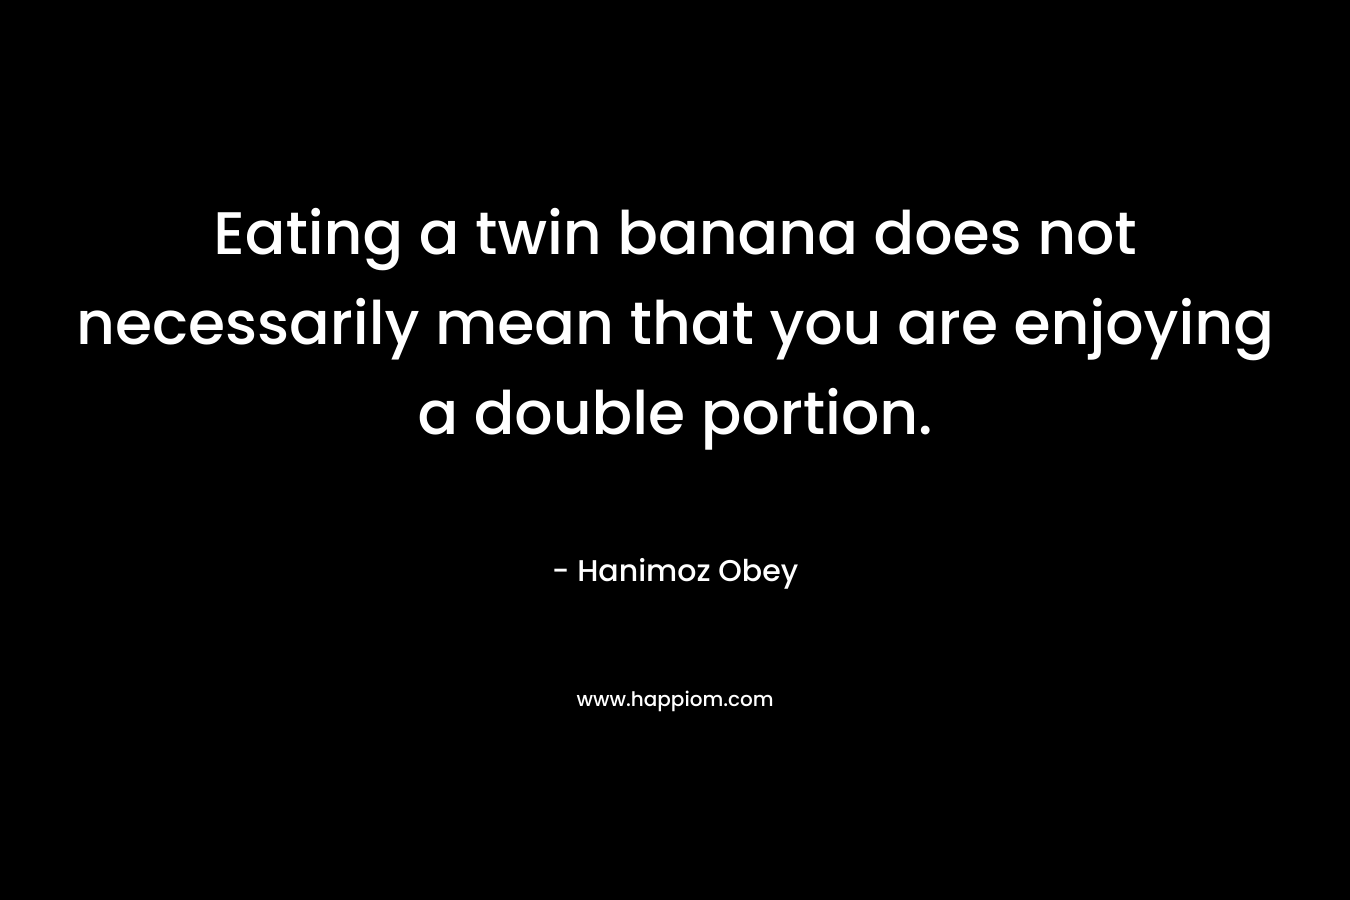 Eating a twin banana does not necessarily mean that you are enjoying a double portion. – Hanimoz Obey